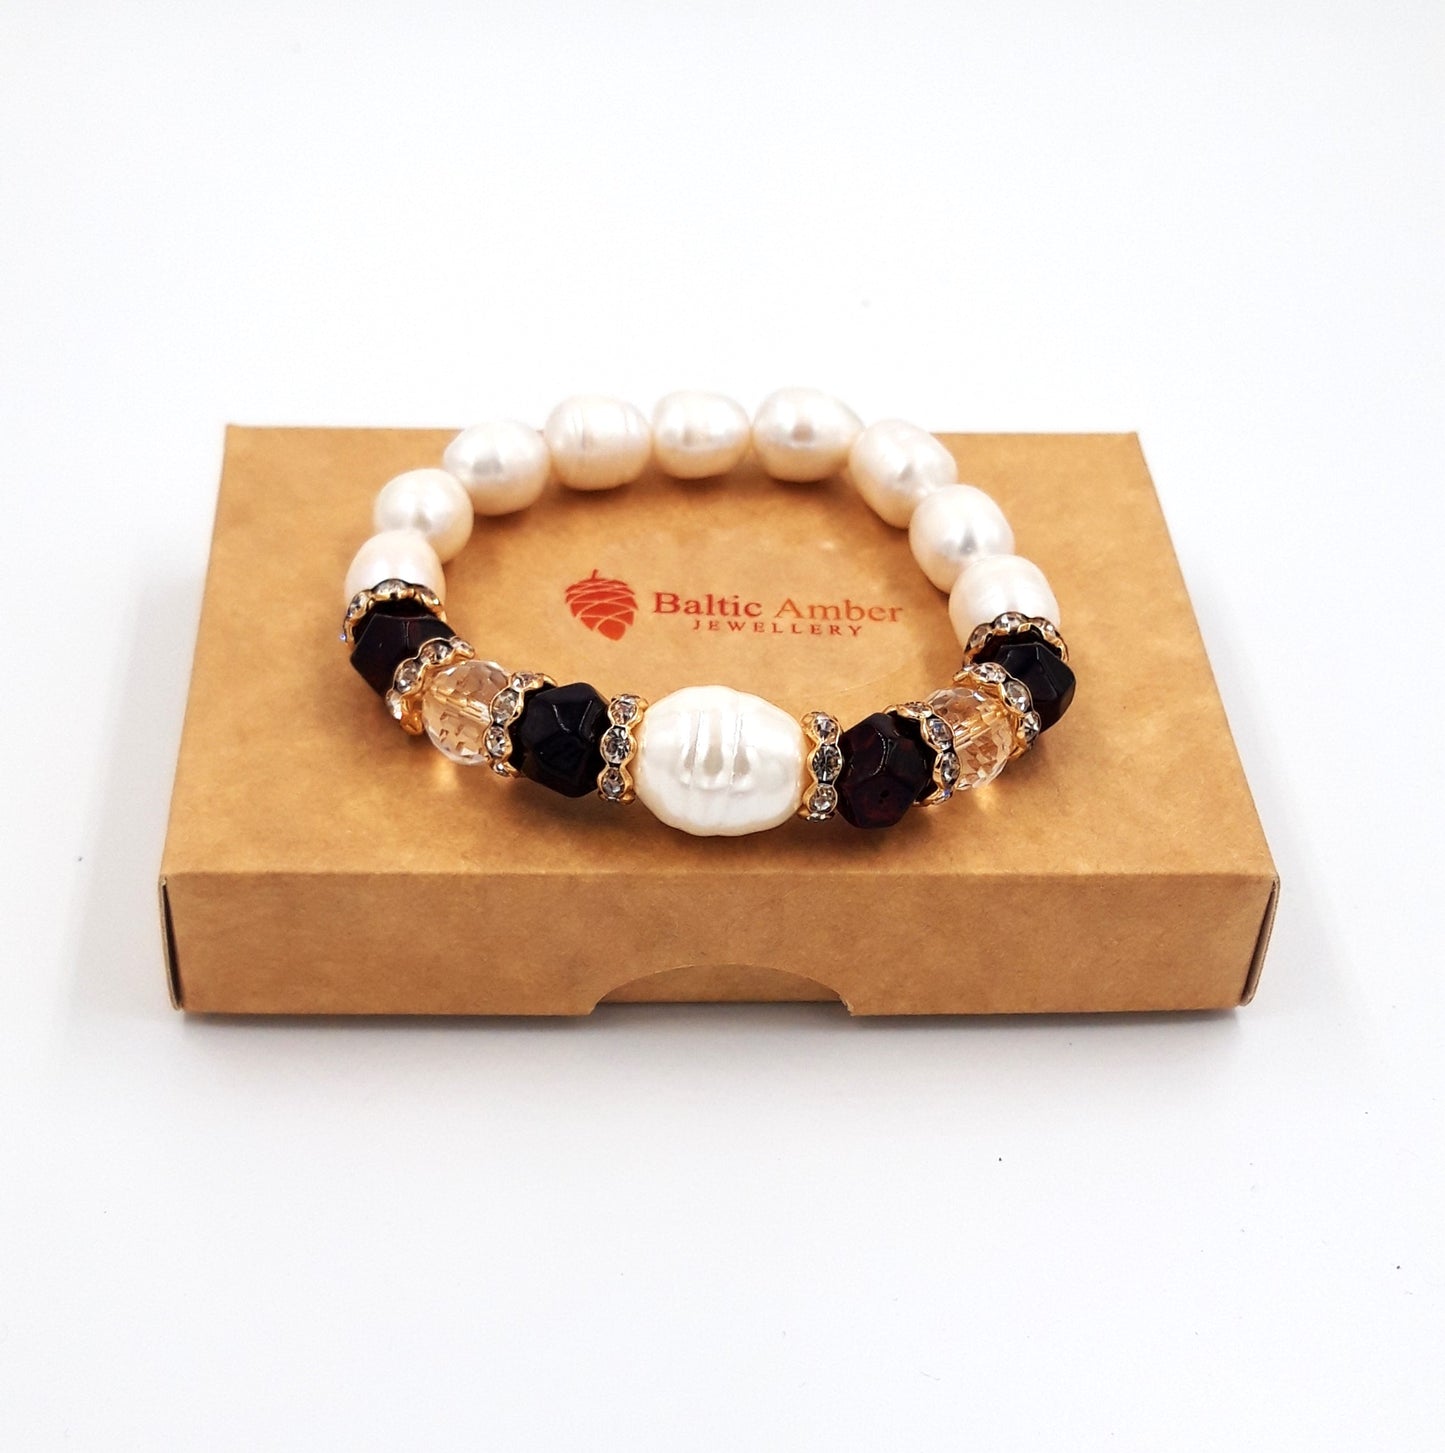 Baltic amber bracelet for adults with freshwater pearls and Swarovski crystal